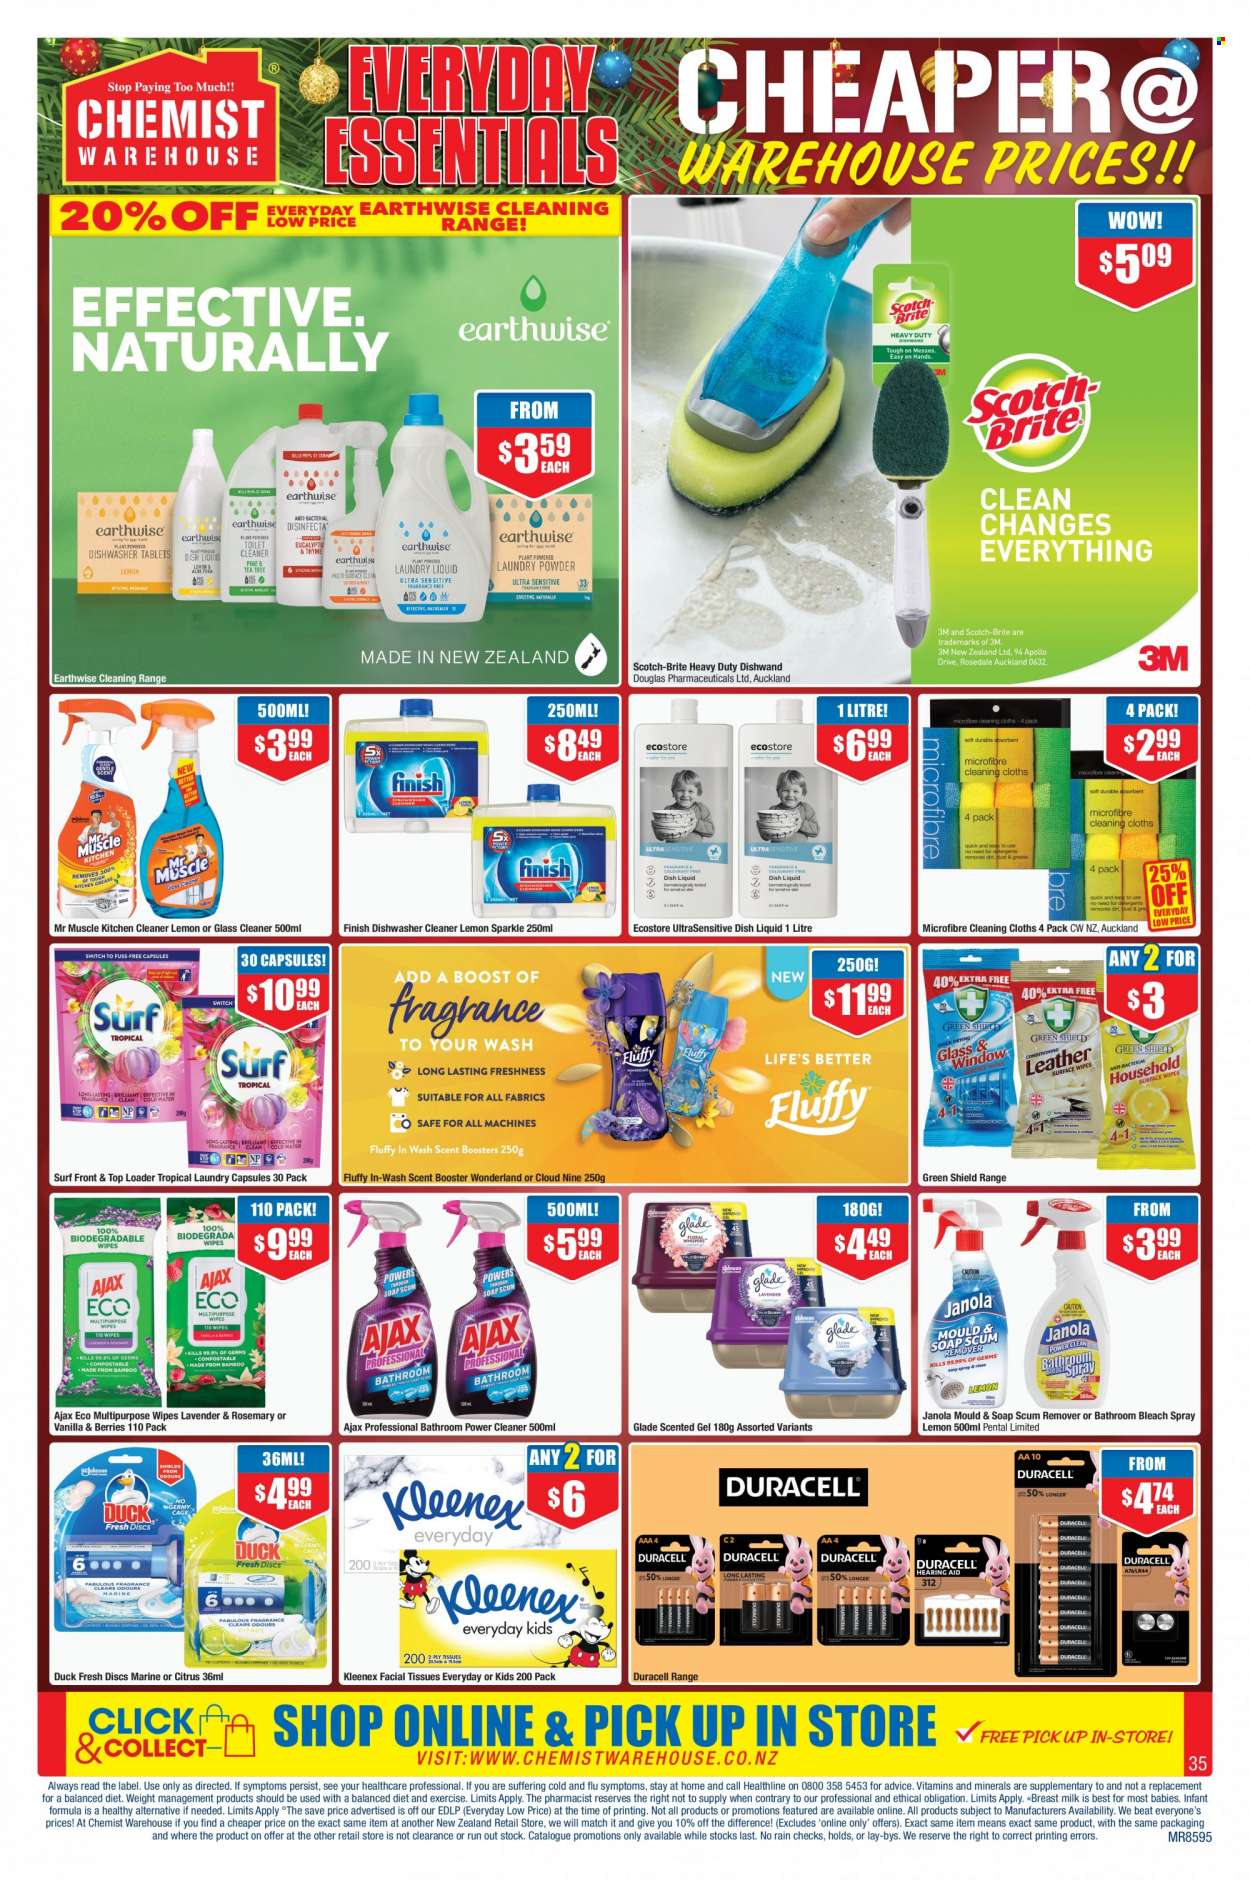 thumbnail - Chemist Warehouse mailer - 28.11.2022 - 24.12.2022 - Sales products - wipes, Kleenex, tissues, multipurpose wipes, cleaner, bleach, Ajax Eco, glass cleaner, Mr. Muscle, Ajax, laundry capsules, Surf, dishwashing liquid, dishwasher cleaner, soap, facial tissues, Brite. Page 35.